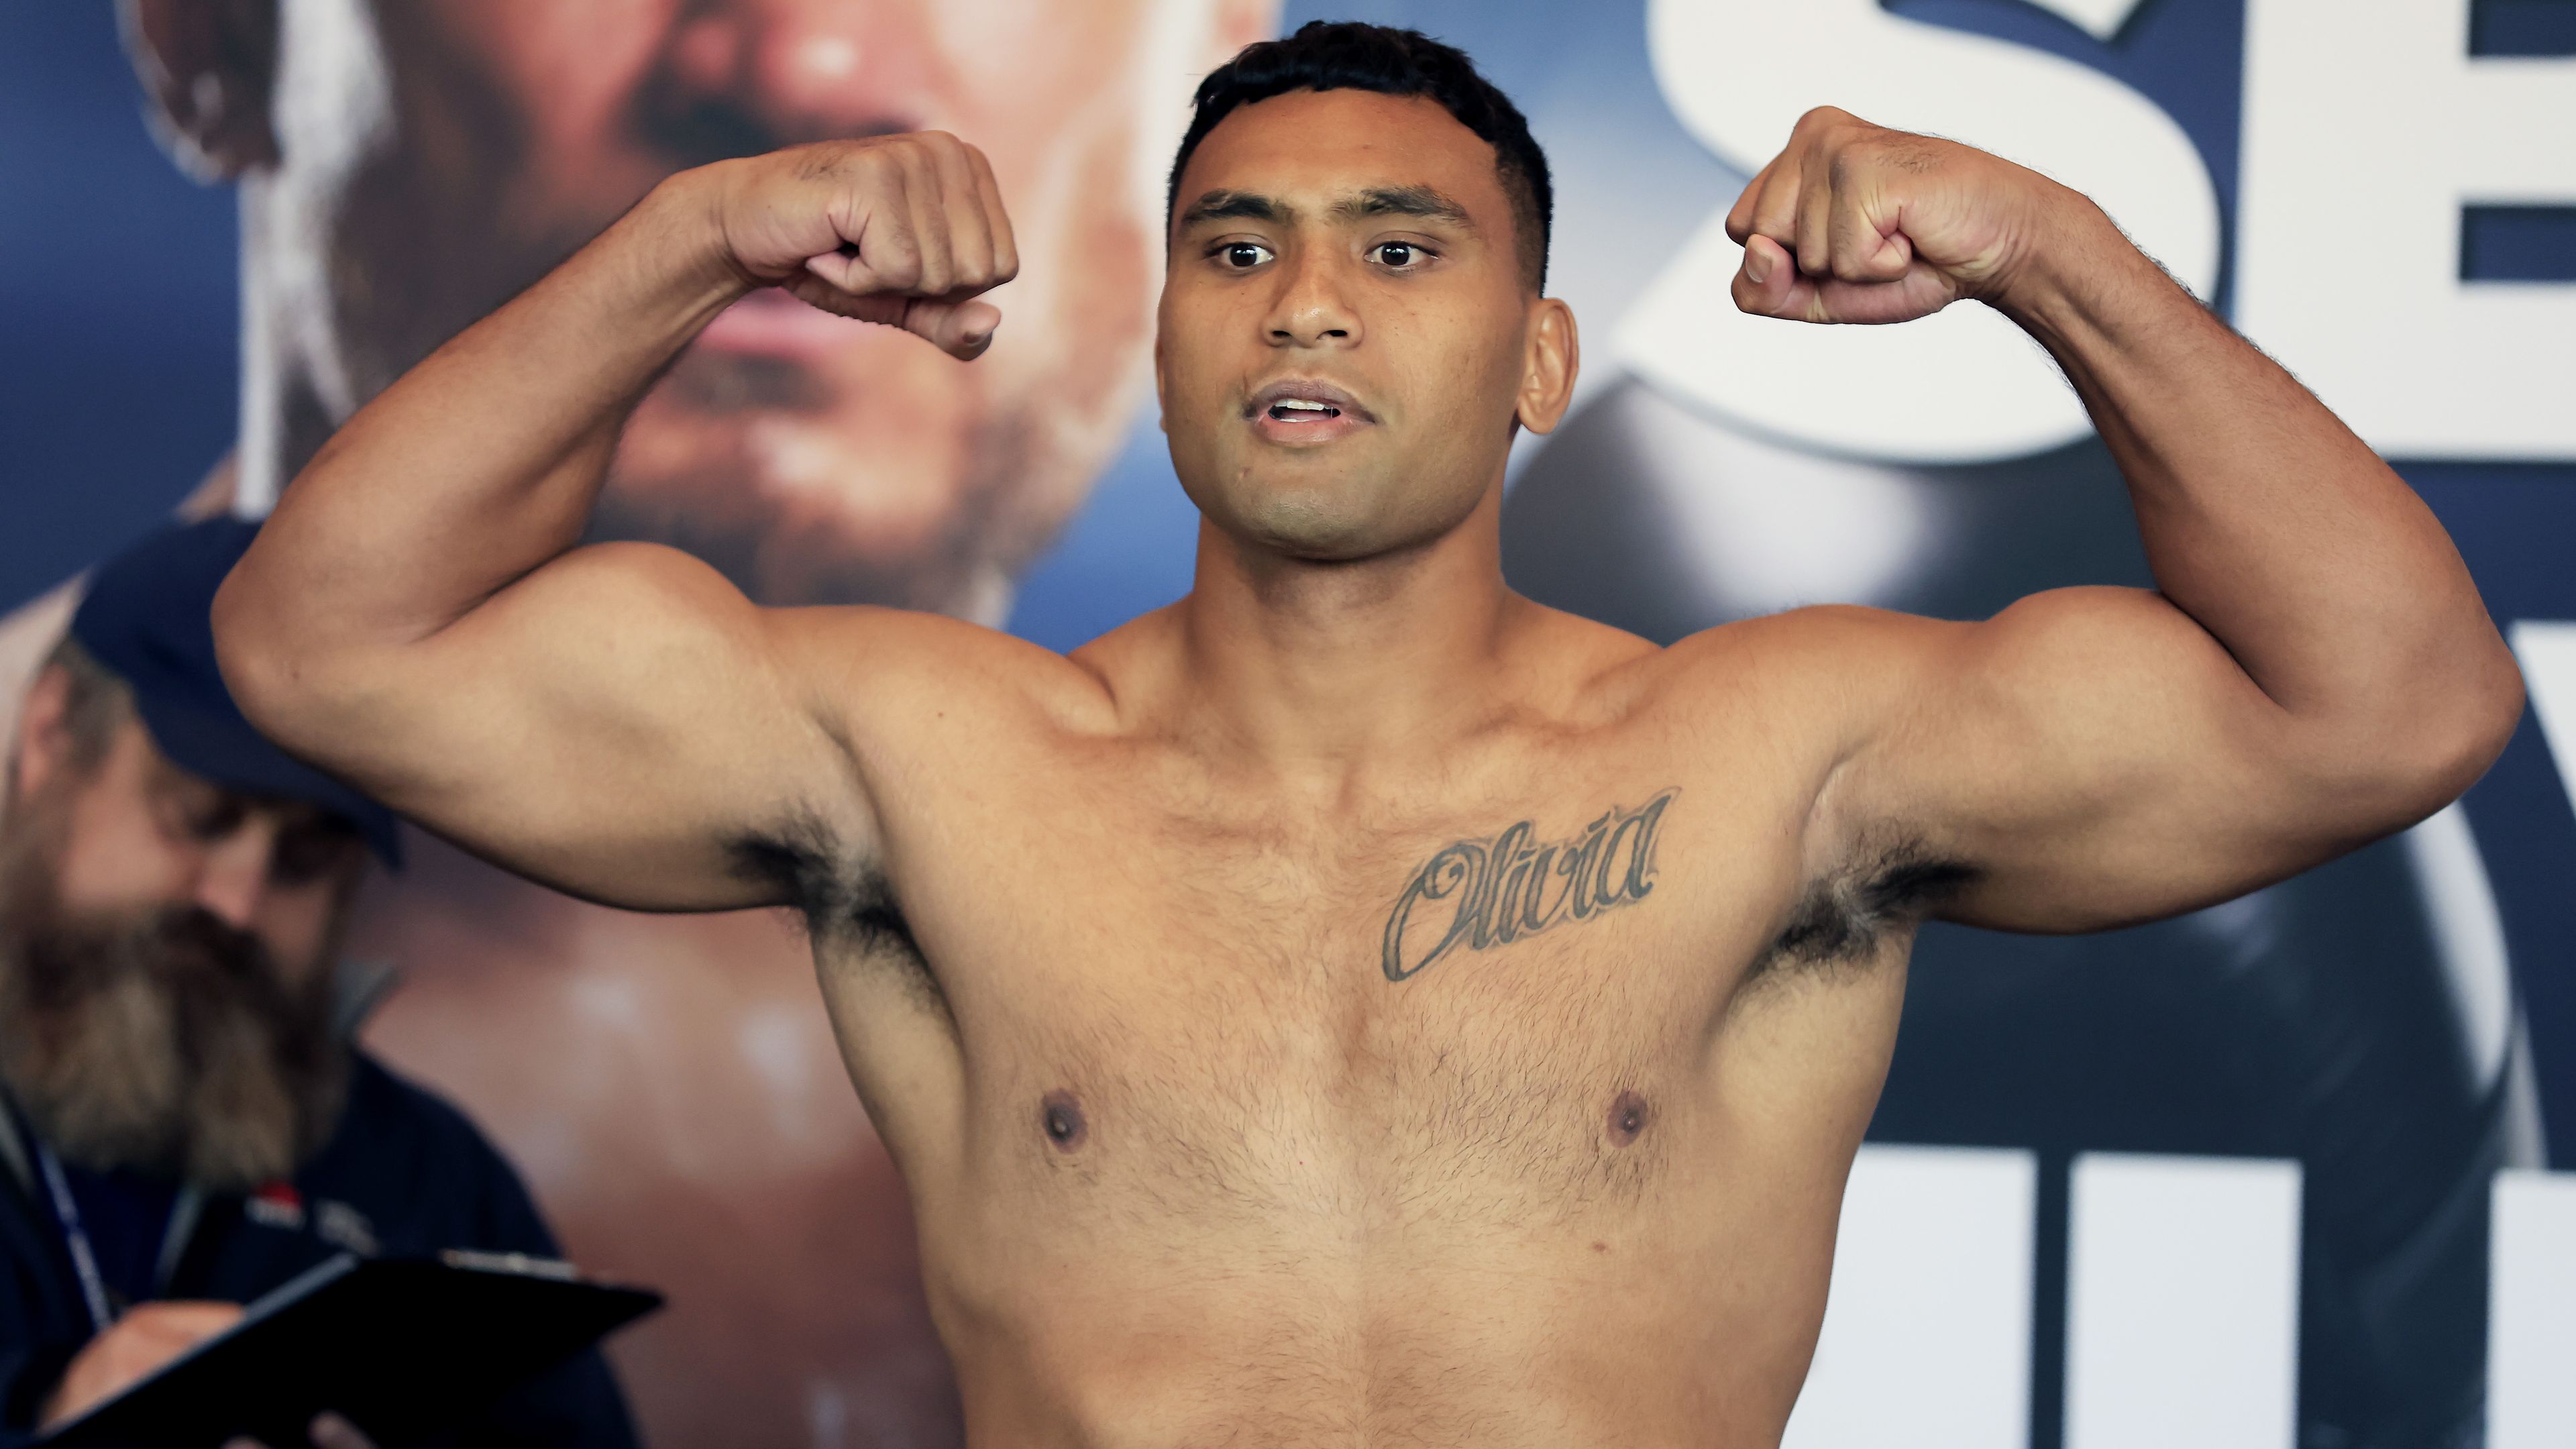 Bulldogs NRL player Tevita Pangai Jr weighs in ahead of his undercard fight with Jeremiah Tupai.